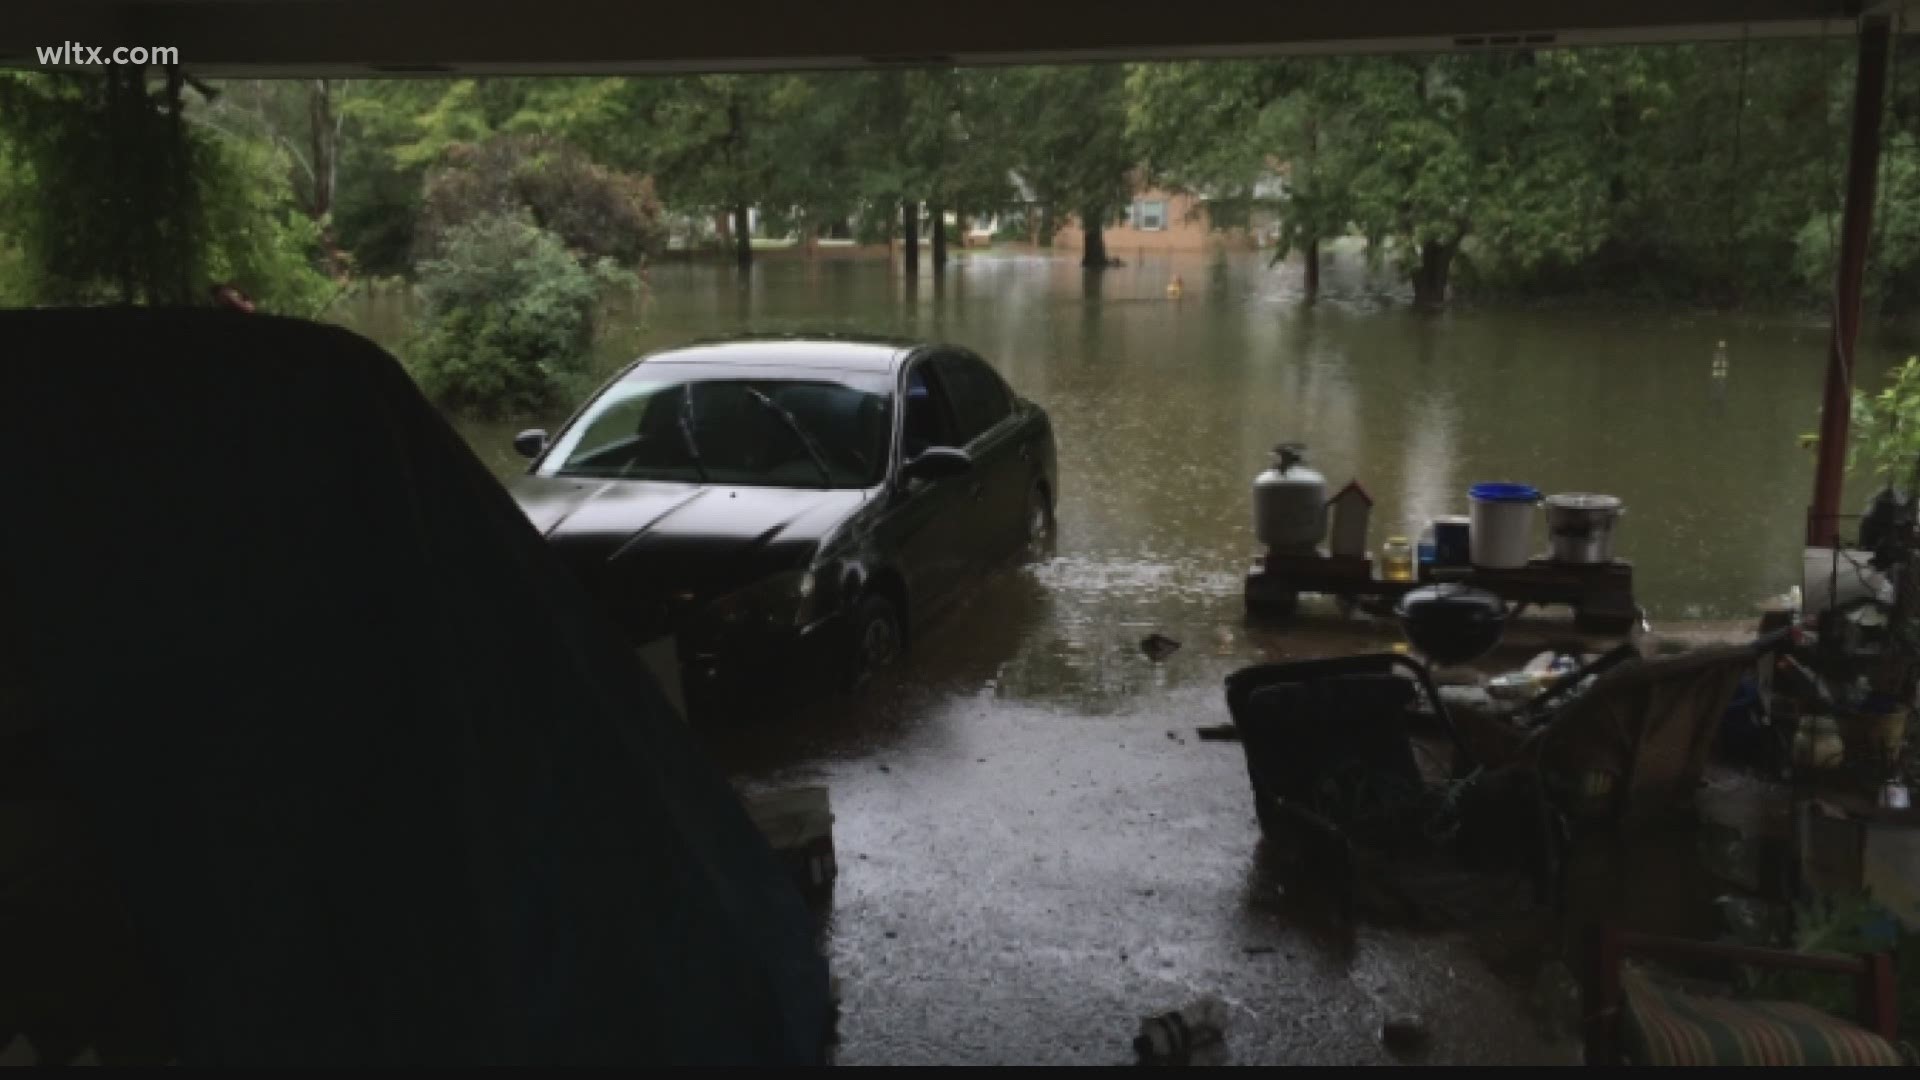 Patrick Moore, "I'm scared every spring when it comes, every spring when I see any rain and it's going to be over 4 inches I start picking stuff up off the carport."